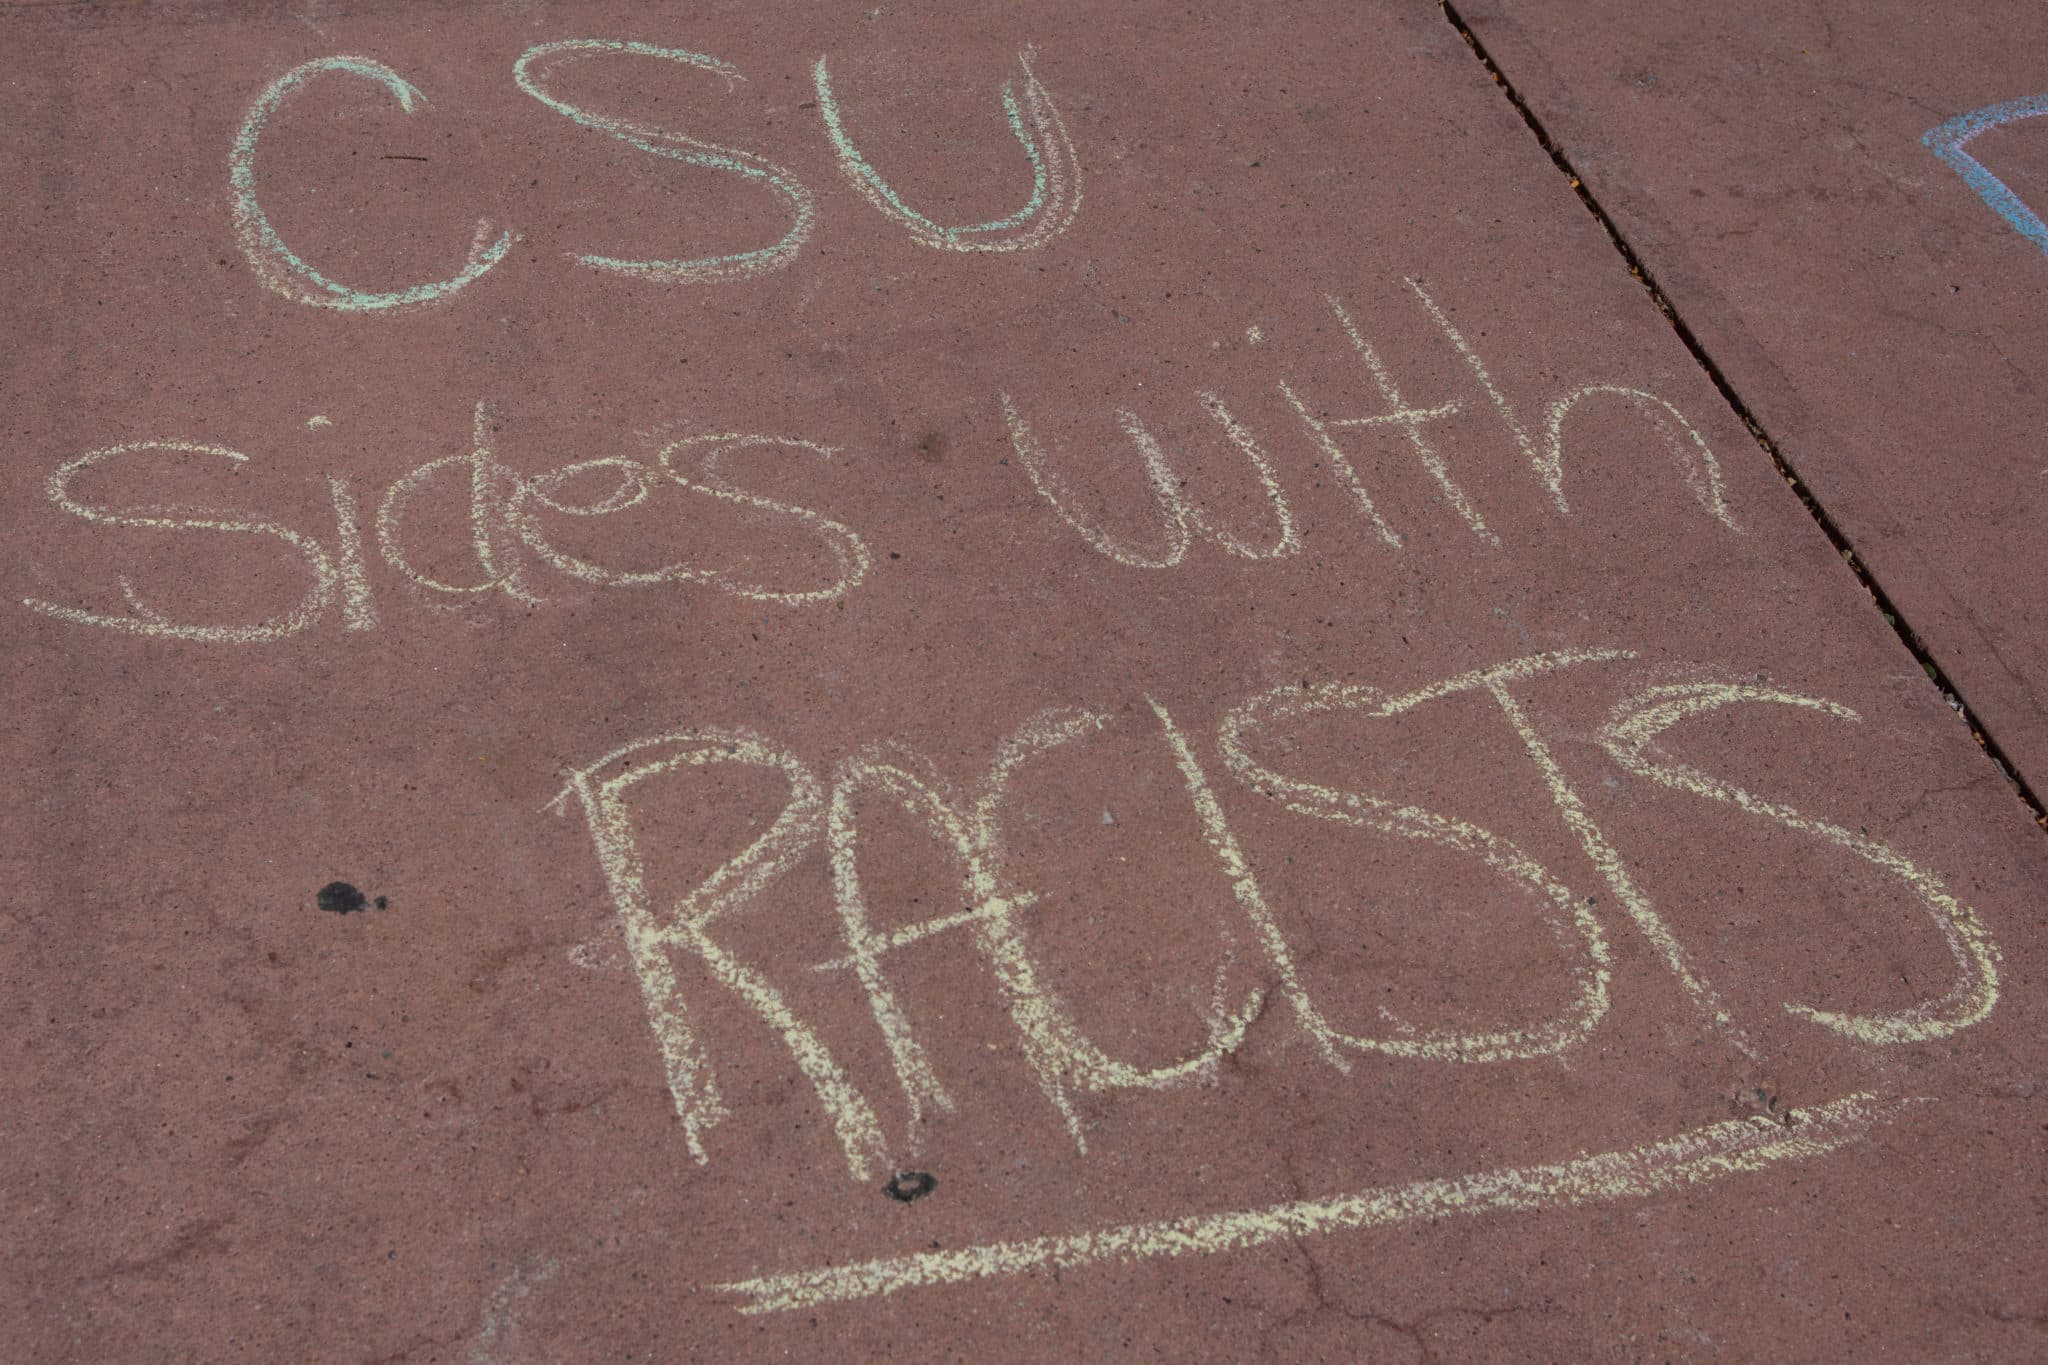 chalk message reading CSU sides with racists